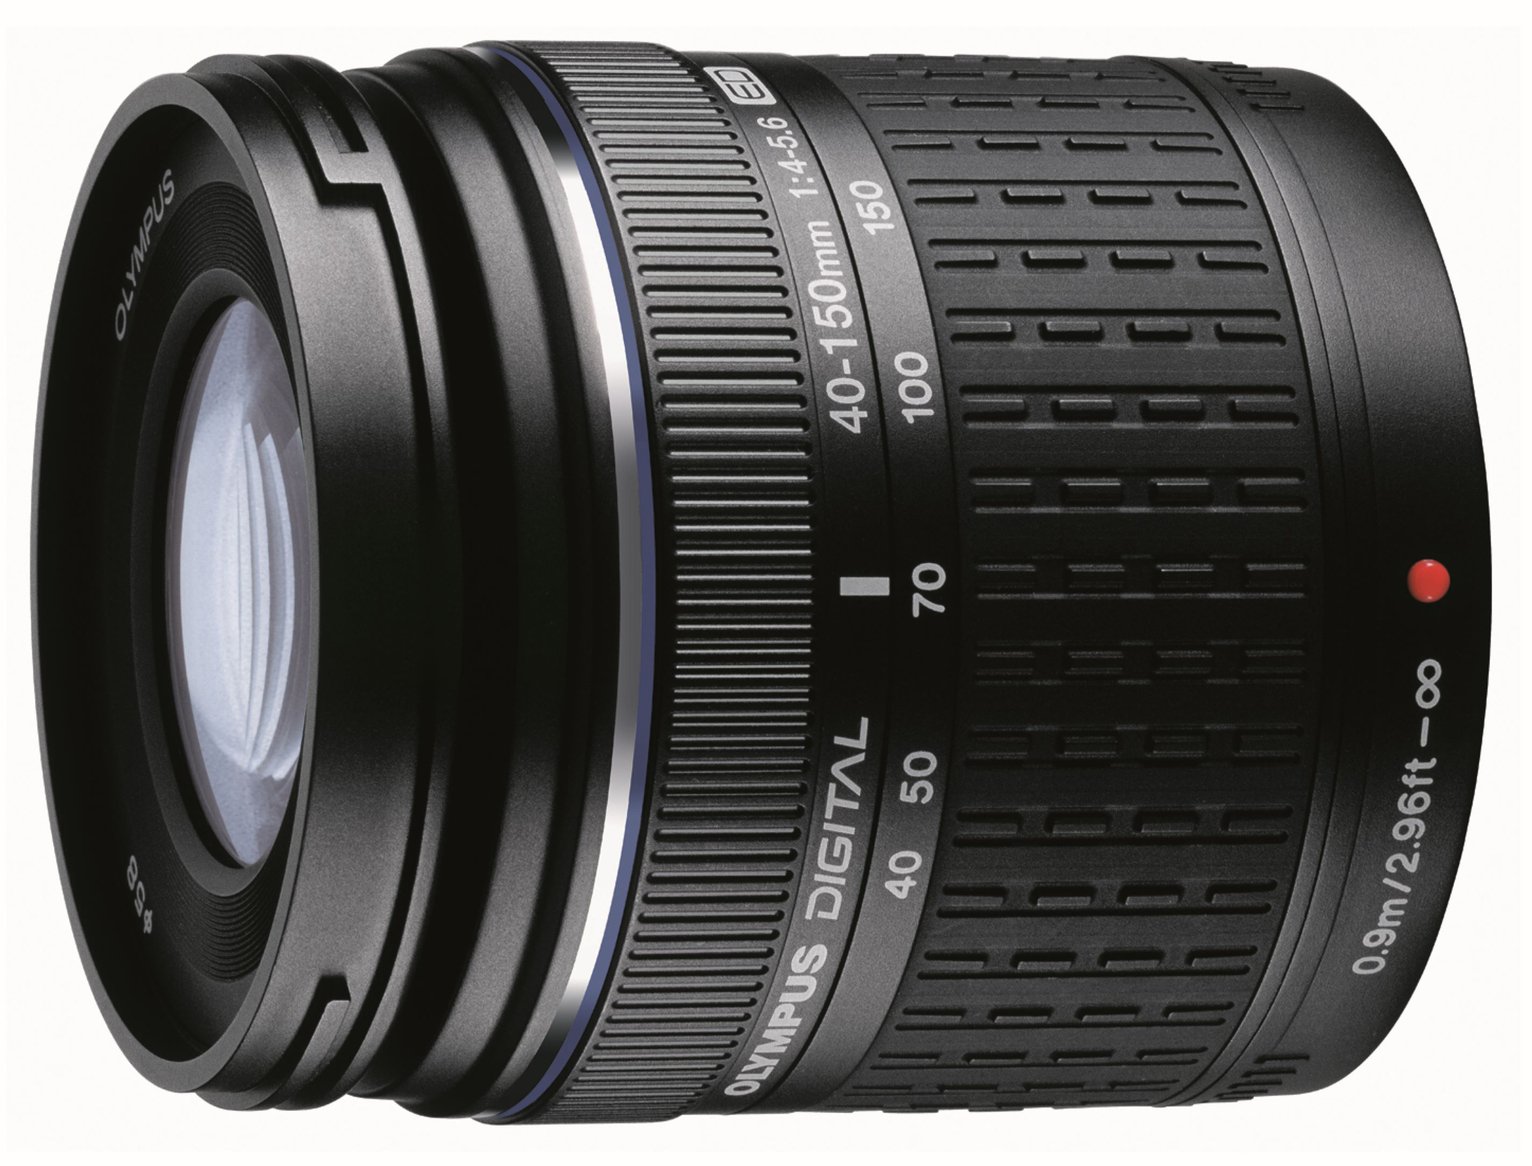 Olympus 40-150mm Telephoto Zoom Lens Review